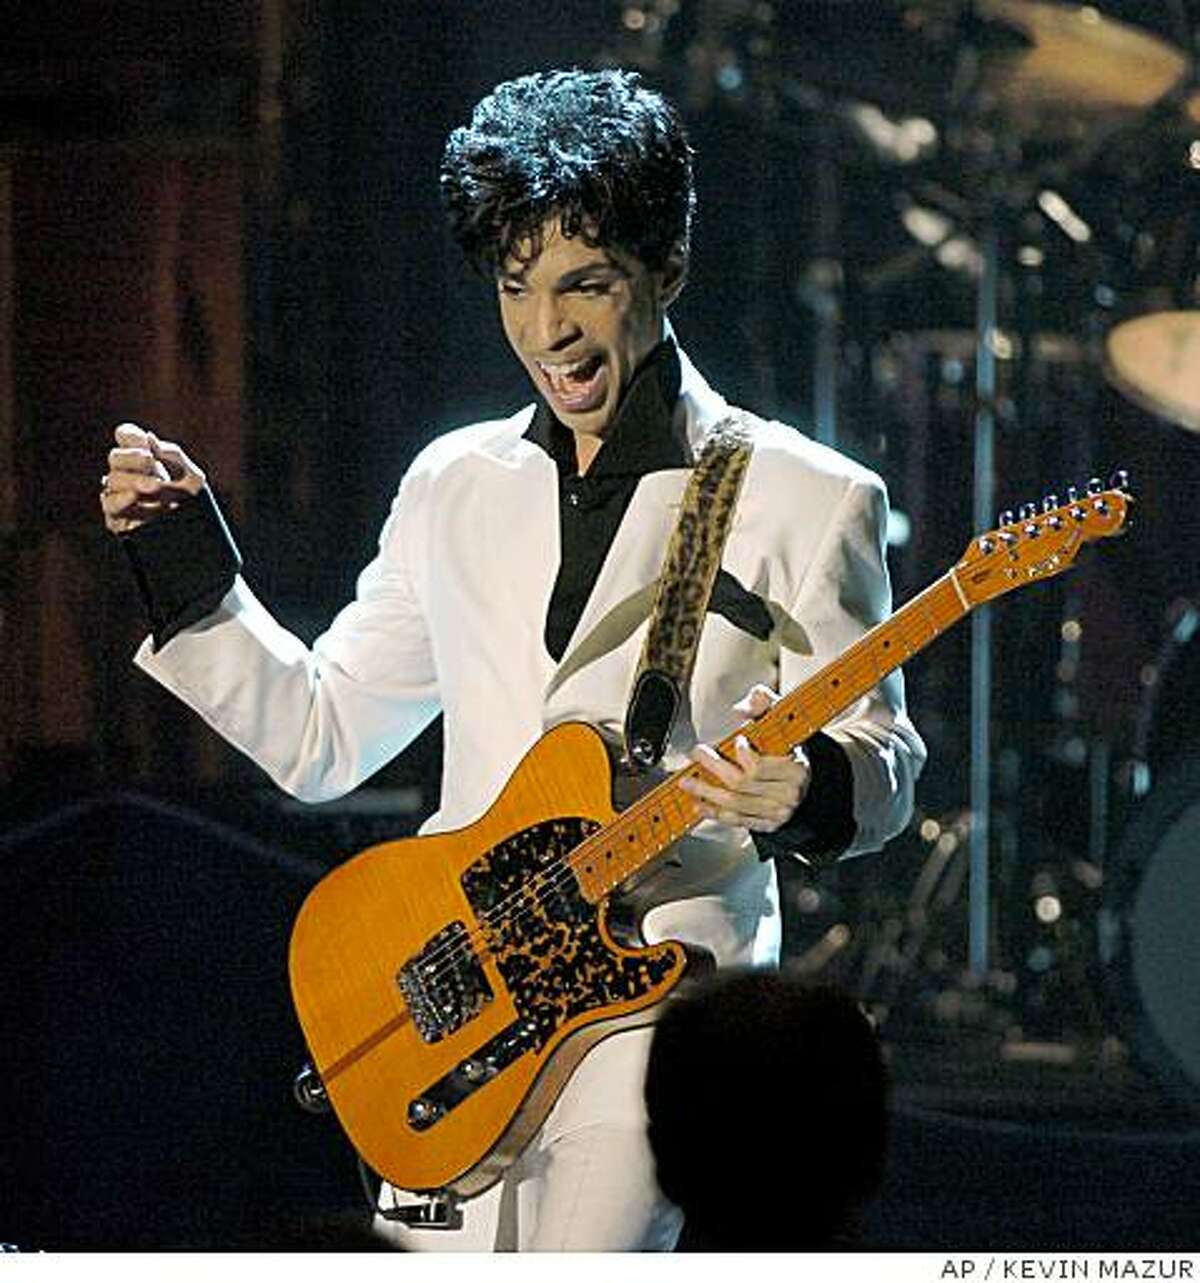 Prince performs Monday, March 15, 2004, at the Waldorf Astoria Hotel in New York City, after being inducted into the Rock and Roll Hall of Fame. Prince was among seven artists honored for their contribution to rock and roll. (AP Photo/Wireimage, Kevin Mazur